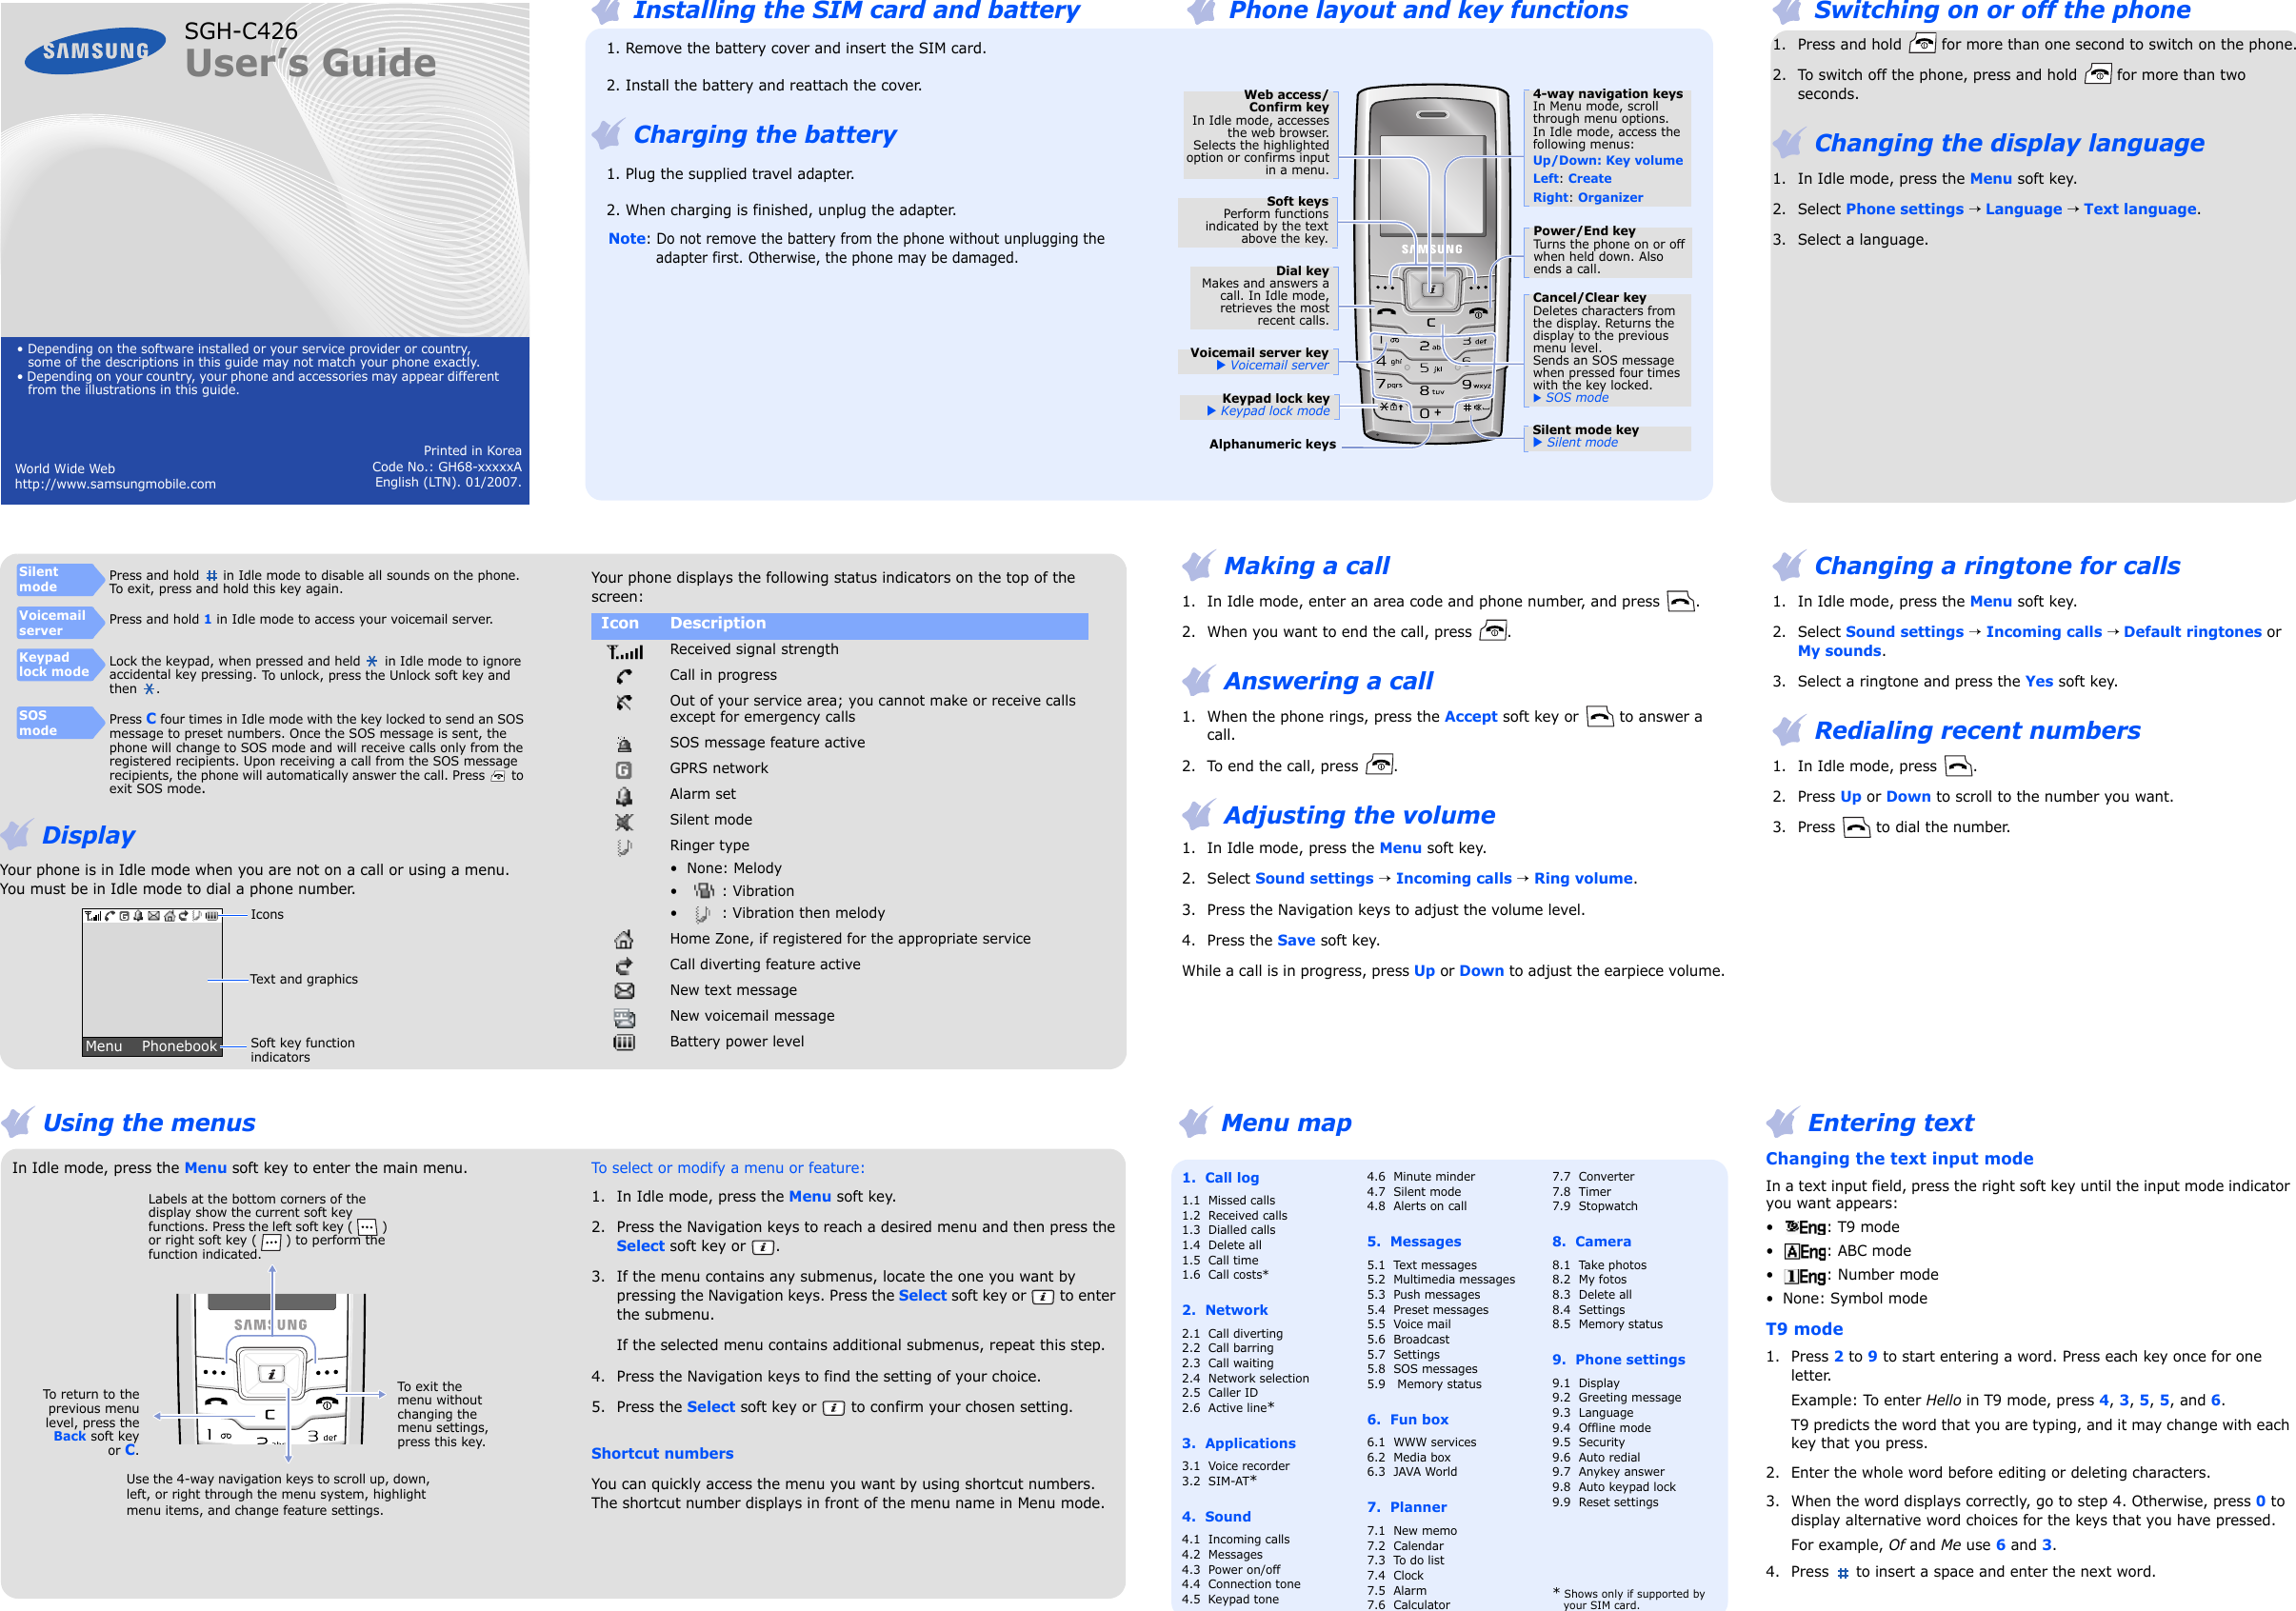 Printed in KoreaCode No.: GH68-xxxxxAEnglish (LTN). 01/2007.World Wide Web                                             http://www.samsungmobile.comSGH-C426User’s Guide• Depending on the software installed or your service provider or country, some of the descriptions in this guide may not match your phone exactly.• Depending on your country, your phone and accessories may appear different from the illustrations in this guide.1.  Call log1.1  Missed calls1.2  Received calls1.3  Dialled calls1.4  Delete all1.5  Call time1.6  Call costs*2.  Network 2.1  Call diverting2.2  Call barring2.3  Call waiting2.4  Network selection2.5  Caller ID2.6  Active line*3.  Applications3.1  Voice recorder3.2  SIM-AT*4.  Sound 4.1  Incoming calls4.2  Messages4.3  Power on/off4.4  Connection tone4.5  Keypad tone4.6  Minute minder4.7  Silent mode4.8  Alerts on call5.  Messages5.1  Text messages5.2  Multimedia messages5.3  Push messages 5.4  Preset messages5.5  Voice mail5.6  Broadcast5.7  Settings5.8  SOS messages5.9   Memory status6.  Fun box6.1  WWW services6.2  Media box6.3  JAVA World7.  Planner7.1  New memo  7.2  Calendar7.3  To do list7.4  Clock7.5  Alarm7.6  Calculator7.7  Converter7.8  Timer7.9  Stopwatch8.  Camera8.1  Take photos8.2  My fotos8.3  Delete all8.4  Settings8.5  Memory status9.  Phone settings9.1  Display9.2  Greeting message9.3  Language9.4  Offline mode9.5  Security9.6  Auto redial9.7  Anykey answer9.8  Auto keypad lock9.9  Reset settings* Shows only if supported by your SIM card. Switching on or off the phone 1. Press and hold   for more than one second to switch on the phone.2. To switch off the phone, press and hold   for more than two seconds. Changing the display language1. In Idle mode, press the Menu soft key.2. Select Phone settings → Language → Text language.3. Select a language. Installing the SIM card and battery   1. Remove the battery cover and insert the SIM card.   2. Install the battery and reattach the cover. Charging the battery   1. Plug the supplied travel adapter.   2. When charging is finished, unplug the adapter.Note: Do not remove the battery from the phone without unplugging the adapter first. Otherwise, the phone may be damaged. Phone layout and key functionsWeb access/Confirm keyIn Idle mode, accessesthe web browser.Selects the highlightedoption or confirms inputin a menu.Voicemail server key X Voicemail serverSoft keysPerform functionsindicated by the textabove the key.4-way navigation keysIn Menu mode, scroll through menu options.In Idle mode, access the following menus:Up/Down: Key volumeLeft: CreateRight: OrganizerPower/End keyTurns the phone on or off when held down. Also ends a call.Silent mode keyX Silent mode Alphanumeric keysDial keyMakes and answers acall. In Idle mode,retrieves the mostrecent calls.Cancel/Clear keyDeletes characters from the display. Returns the display to the previous menu level. Sends an SOS message when pressed four times with the key locked.X SOS modeKeypad lock key X Keypad lock mode Changing a ringtone for calls1. In Idle mode, press the Menu soft key.2. Select Sound settings → Incoming calls → Default ringtones or My sounds. 3. Select a ringtone and press the Yes soft key. Redialing recent numbers1. In Idle mode, press  .2. Press Up or Down to scroll to the number you want.3. Press   to dial the number.  Using the menusIn Idle mode, press the Menu soft key to enter the main menu.Use the 4-way navigation keys to scroll up, down, left, or right through the menu system, highlight menu items, and change feature settings.To exit the menu without changing the menu settings, press this key.Labels at the bottom corners of the display show the current soft key functions. Press the left soft key ( ) or right soft key ( ) to perform the function indicated.To return to theprevious menulevel, press theBack soft keyor C.To select or modify a menu or feature:1. In Idle mode, press the Menu soft key.2. Press the Navigation keys to reach a desired menu and then press the Select soft key or  .3. If the menu contains any submenus, locate the one you want by pressing the Navigation keys. Press the Select soft key or   to enter the submenu.If the selected menu contains additional submenus, repeat this step.4. Press the Navigation keys to find the setting of your choice.5. Press the Select soft key or   to confirm your chosen setting.Shortcut numbersYou can quickly access the menu you want by using shortcut numbers. The shortcut number displays in front of the menu name in Menu mode. Making a call1. In Idle mode, enter an area code and phone number, and press  . 2. When you want to end the call, press  . Answering a call1. When the phone rings, press the Accept soft key or   to answer a call.2. To end the call, press  . Adjusting the volume1. In Idle mode, press the Menu soft key.2. Select Sound settings → Incoming calls → Ring volume. 3. Press the Navigation keys to adjust the volume level.4. Press the Save soft key. While a call is in progress, press Up or Down to adjust the earpiece volume.Your phone displays the following status indicators on the top of the screen:Icon Description Received signal strengthCall in progressOut of your service area; you cannot make or receive calls except for emergency callsSOS message feature activeGPRS networkAlarm setSilent modeRinger type•None: Melody•: Vibration• : Vibration then melodyHome Zone, if registered for the appropriate serviceCall diverting feature activeNew text messageNew voicemail messageBattery power level Menu map  Entering textChanging the text input modeIn a text input field, press the right soft key until the input mode indicator you want appears: •: T9 mode•: ABC mode• : Number mode• None: Symbol modeT9 mode1. Press 2 to 9 to start entering a word. Press each key once for one letter. Example: To enter Hello in T9 mode, press 4, 3, 5, 5, and 6.T9 predicts the word that you are typing, and it may change with each key that you press.2. Enter the whole word before editing or deleting characters.3. When the word displays correctly, go to step 4. Otherwise, press 0 to display alternative word choices for the keys that you have pressed.For example, Of and Me use 6 and 3.4. Press   to insert a space and enter the next word. DisplayYour phone is in Idle mode when you are not on a call or using a menu. You must be in Idle mode to dial a phone number.SilentmodePress and hold  in Idle mode to disable all sounds on the phone. To exit, press and hold this key again.Voicemail serverPress and hold 1 in Idle mode to access your voicemail server. Keypad lock modeLock the keypad, when pressed and held  in Idle mode to ignore accidental key pressing. To unlock, press the Unlock soft key and then .SOSmodePress C four times in Idle mode with the key locked to send an SOS message to preset numbers. Once the SOS message is sent, the phone will change to SOS mode and will receive calls only from the registered recipients. Upon receiving a call from the SOS message recipients, the phone will automatically answer the call. Press  to exit SOS mode.Text and graphicsSoft key function indicatorsMenu    PhonebookIcons